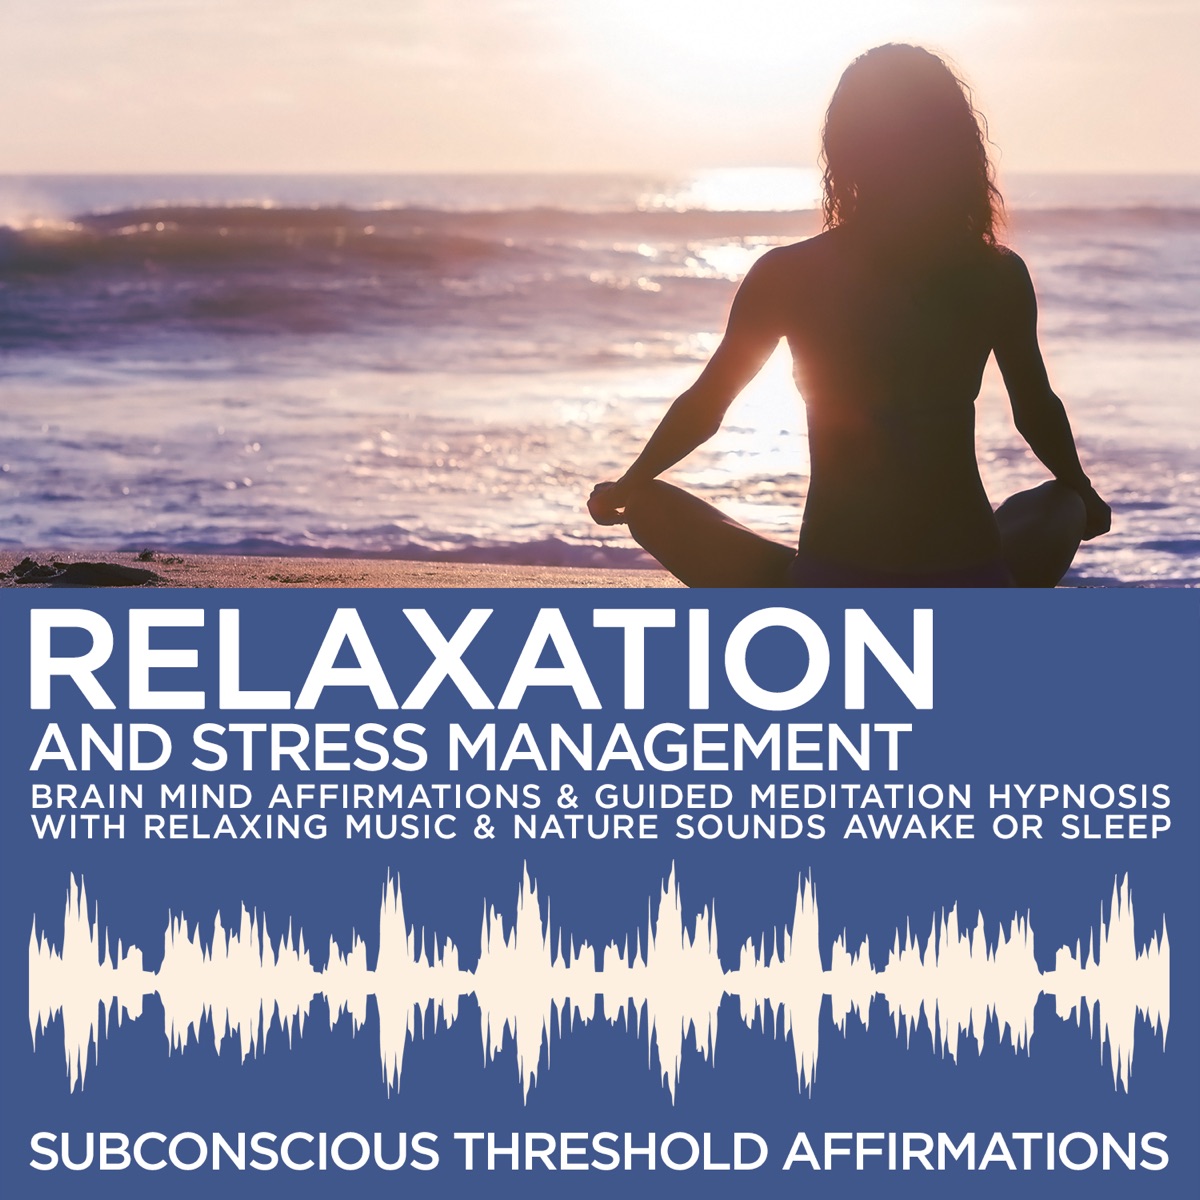 Attracting the Opposite Sex Brain Mind Affirmations and Guided Meditation Hypnosis with Relaxing Music and Nature Sounds Awake or Sleep - Album by Subconscious Threshold Affirmations image image